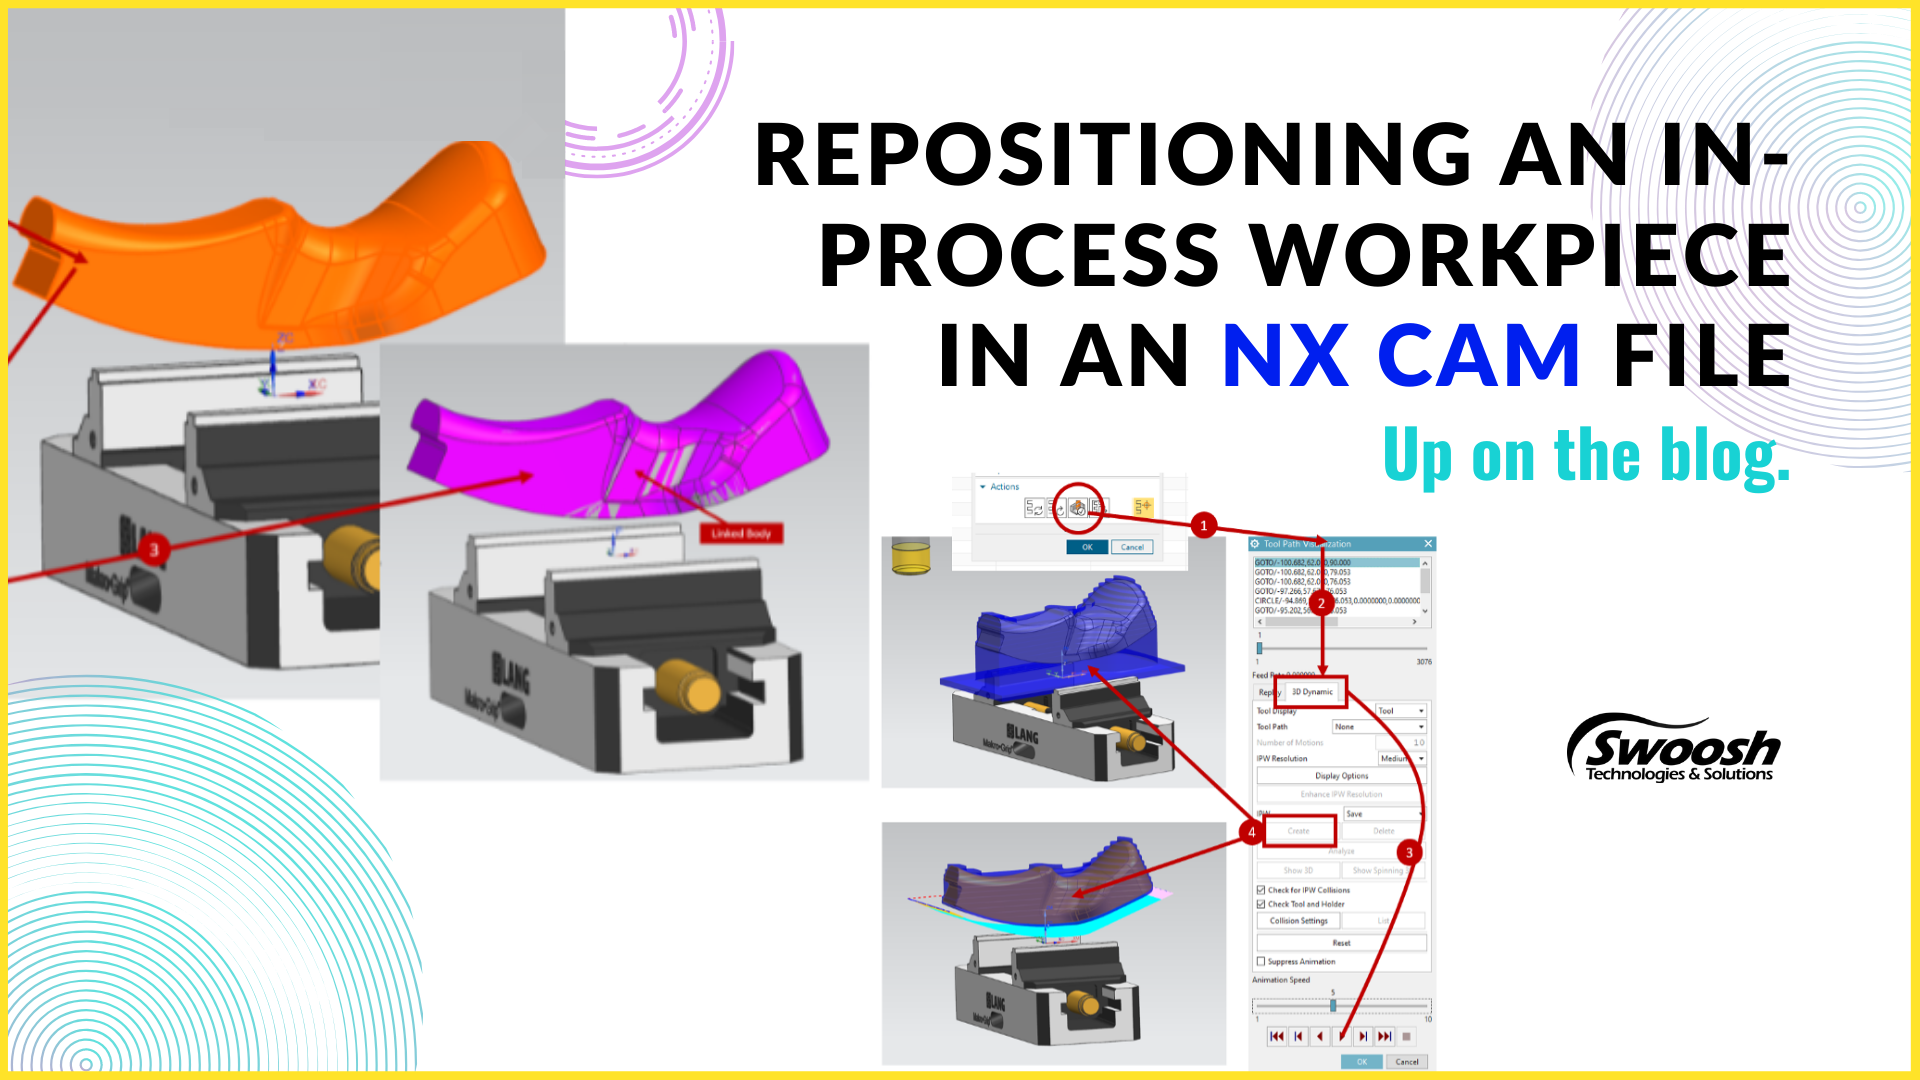 Repositioning an In-Process Workpiece in a Manufacturing File